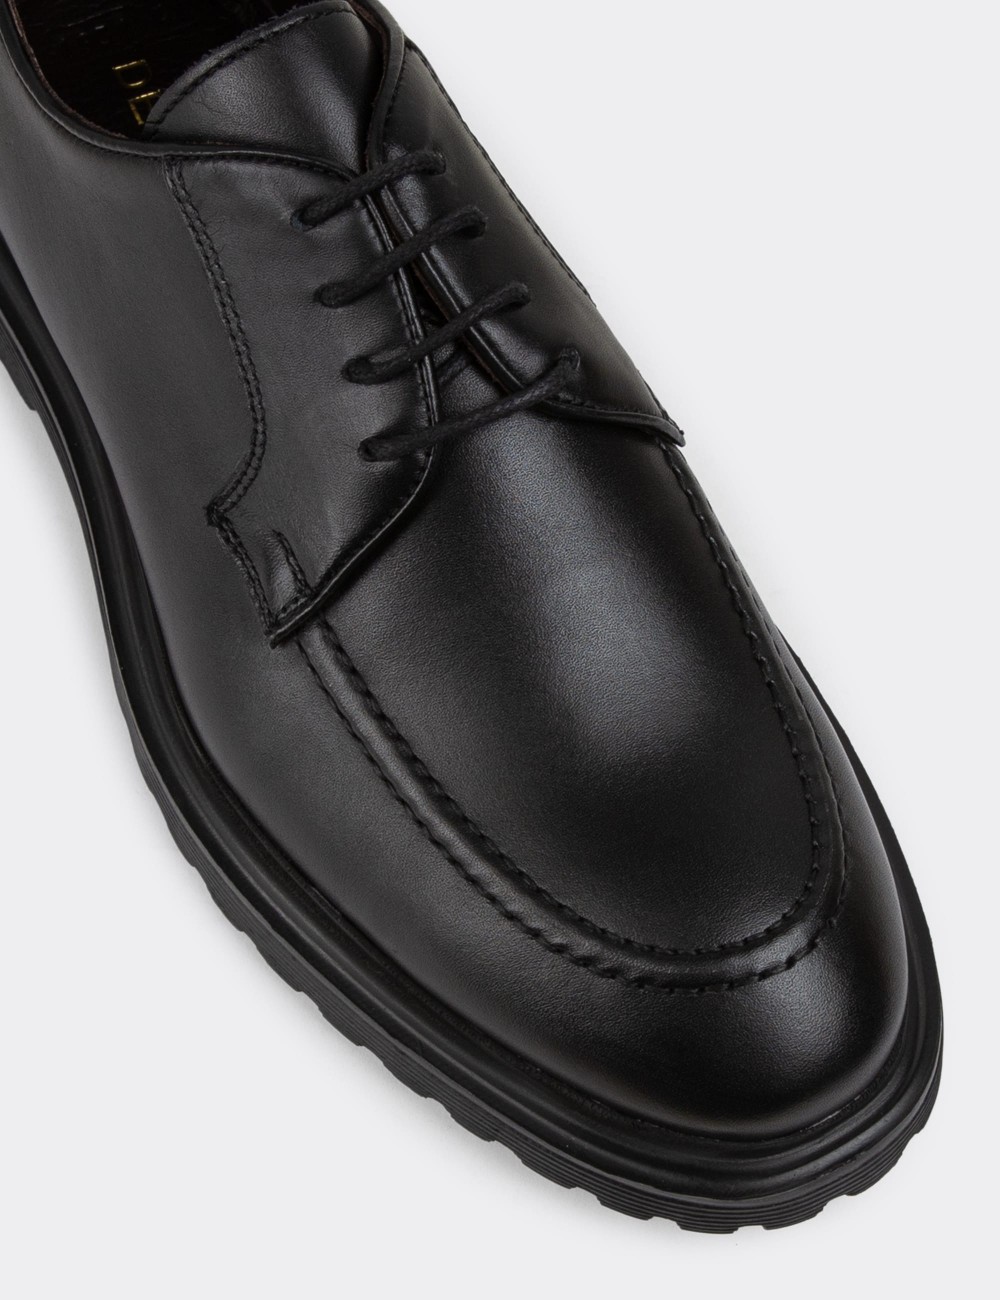 Black Leather Lace-up Shoes - 01931MSYHE03